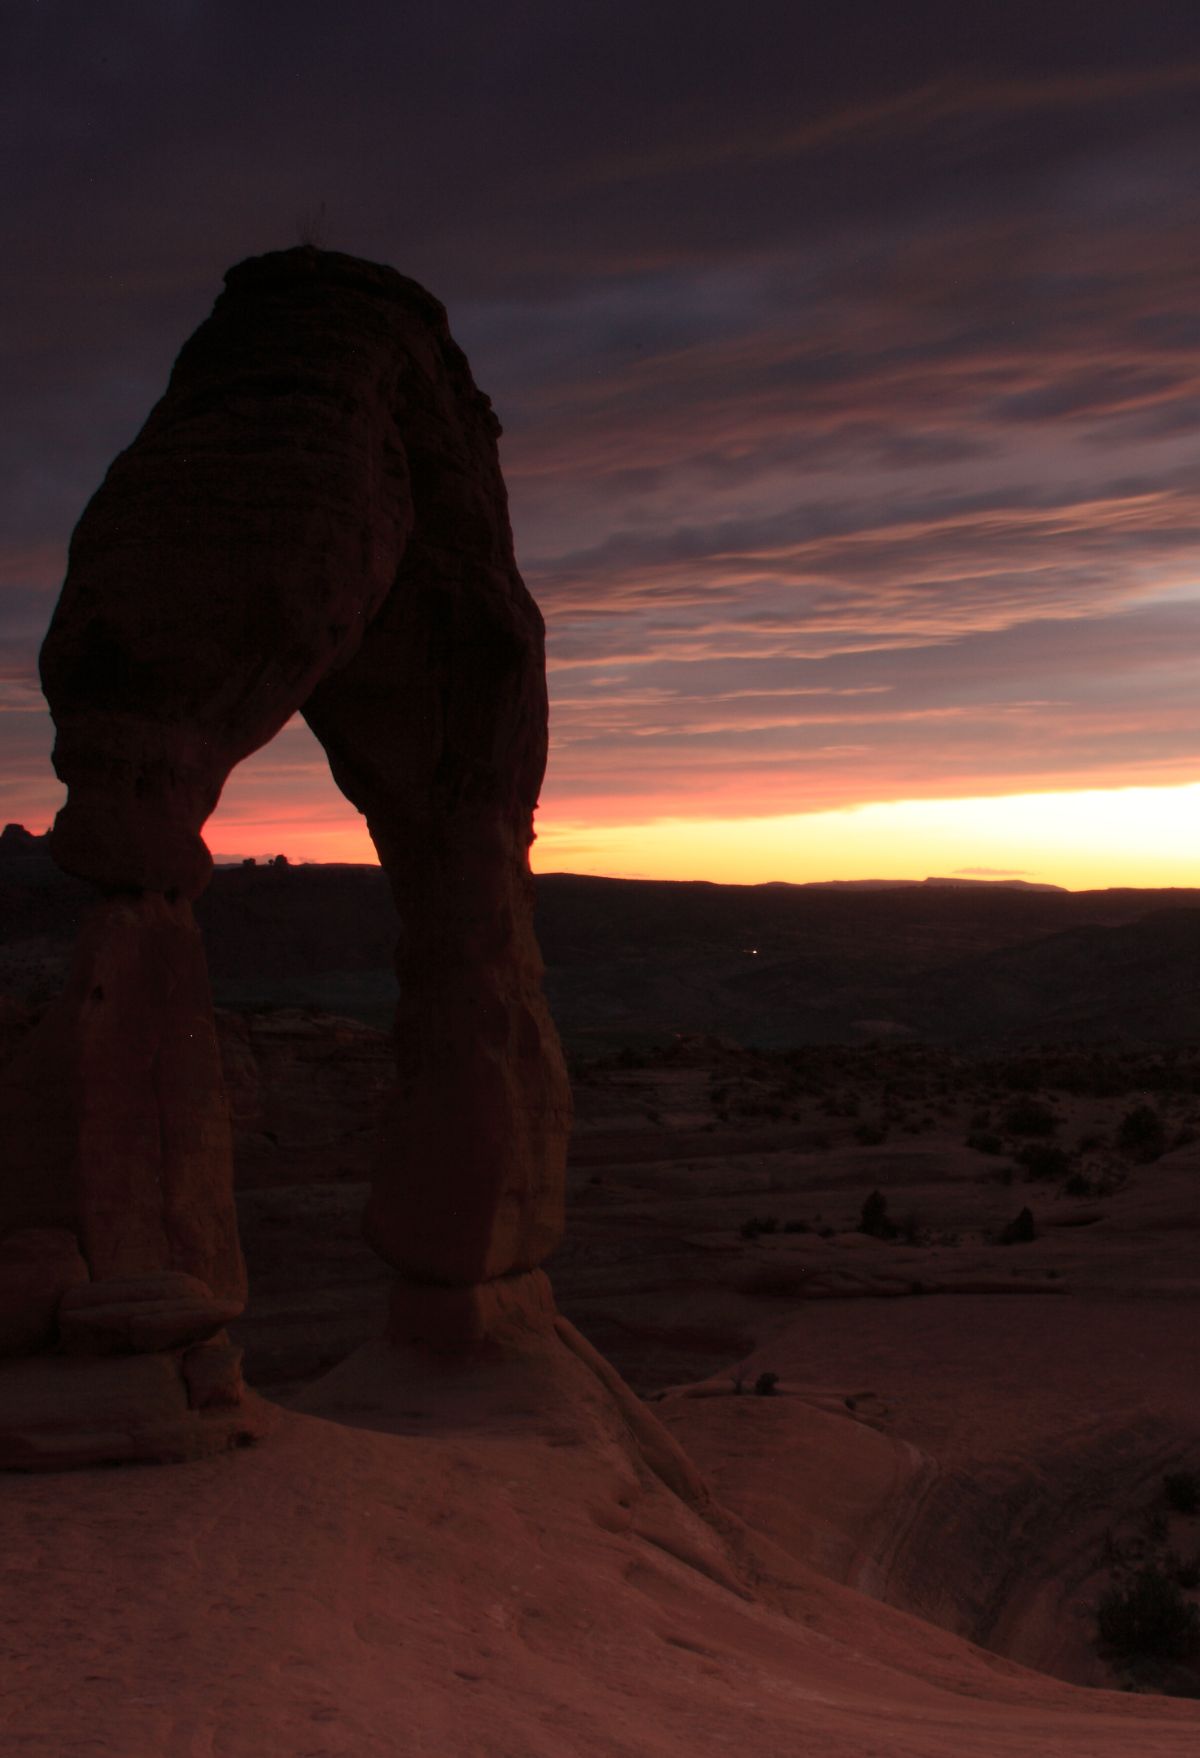 A magnificent rock formation situated in Arches National Park.